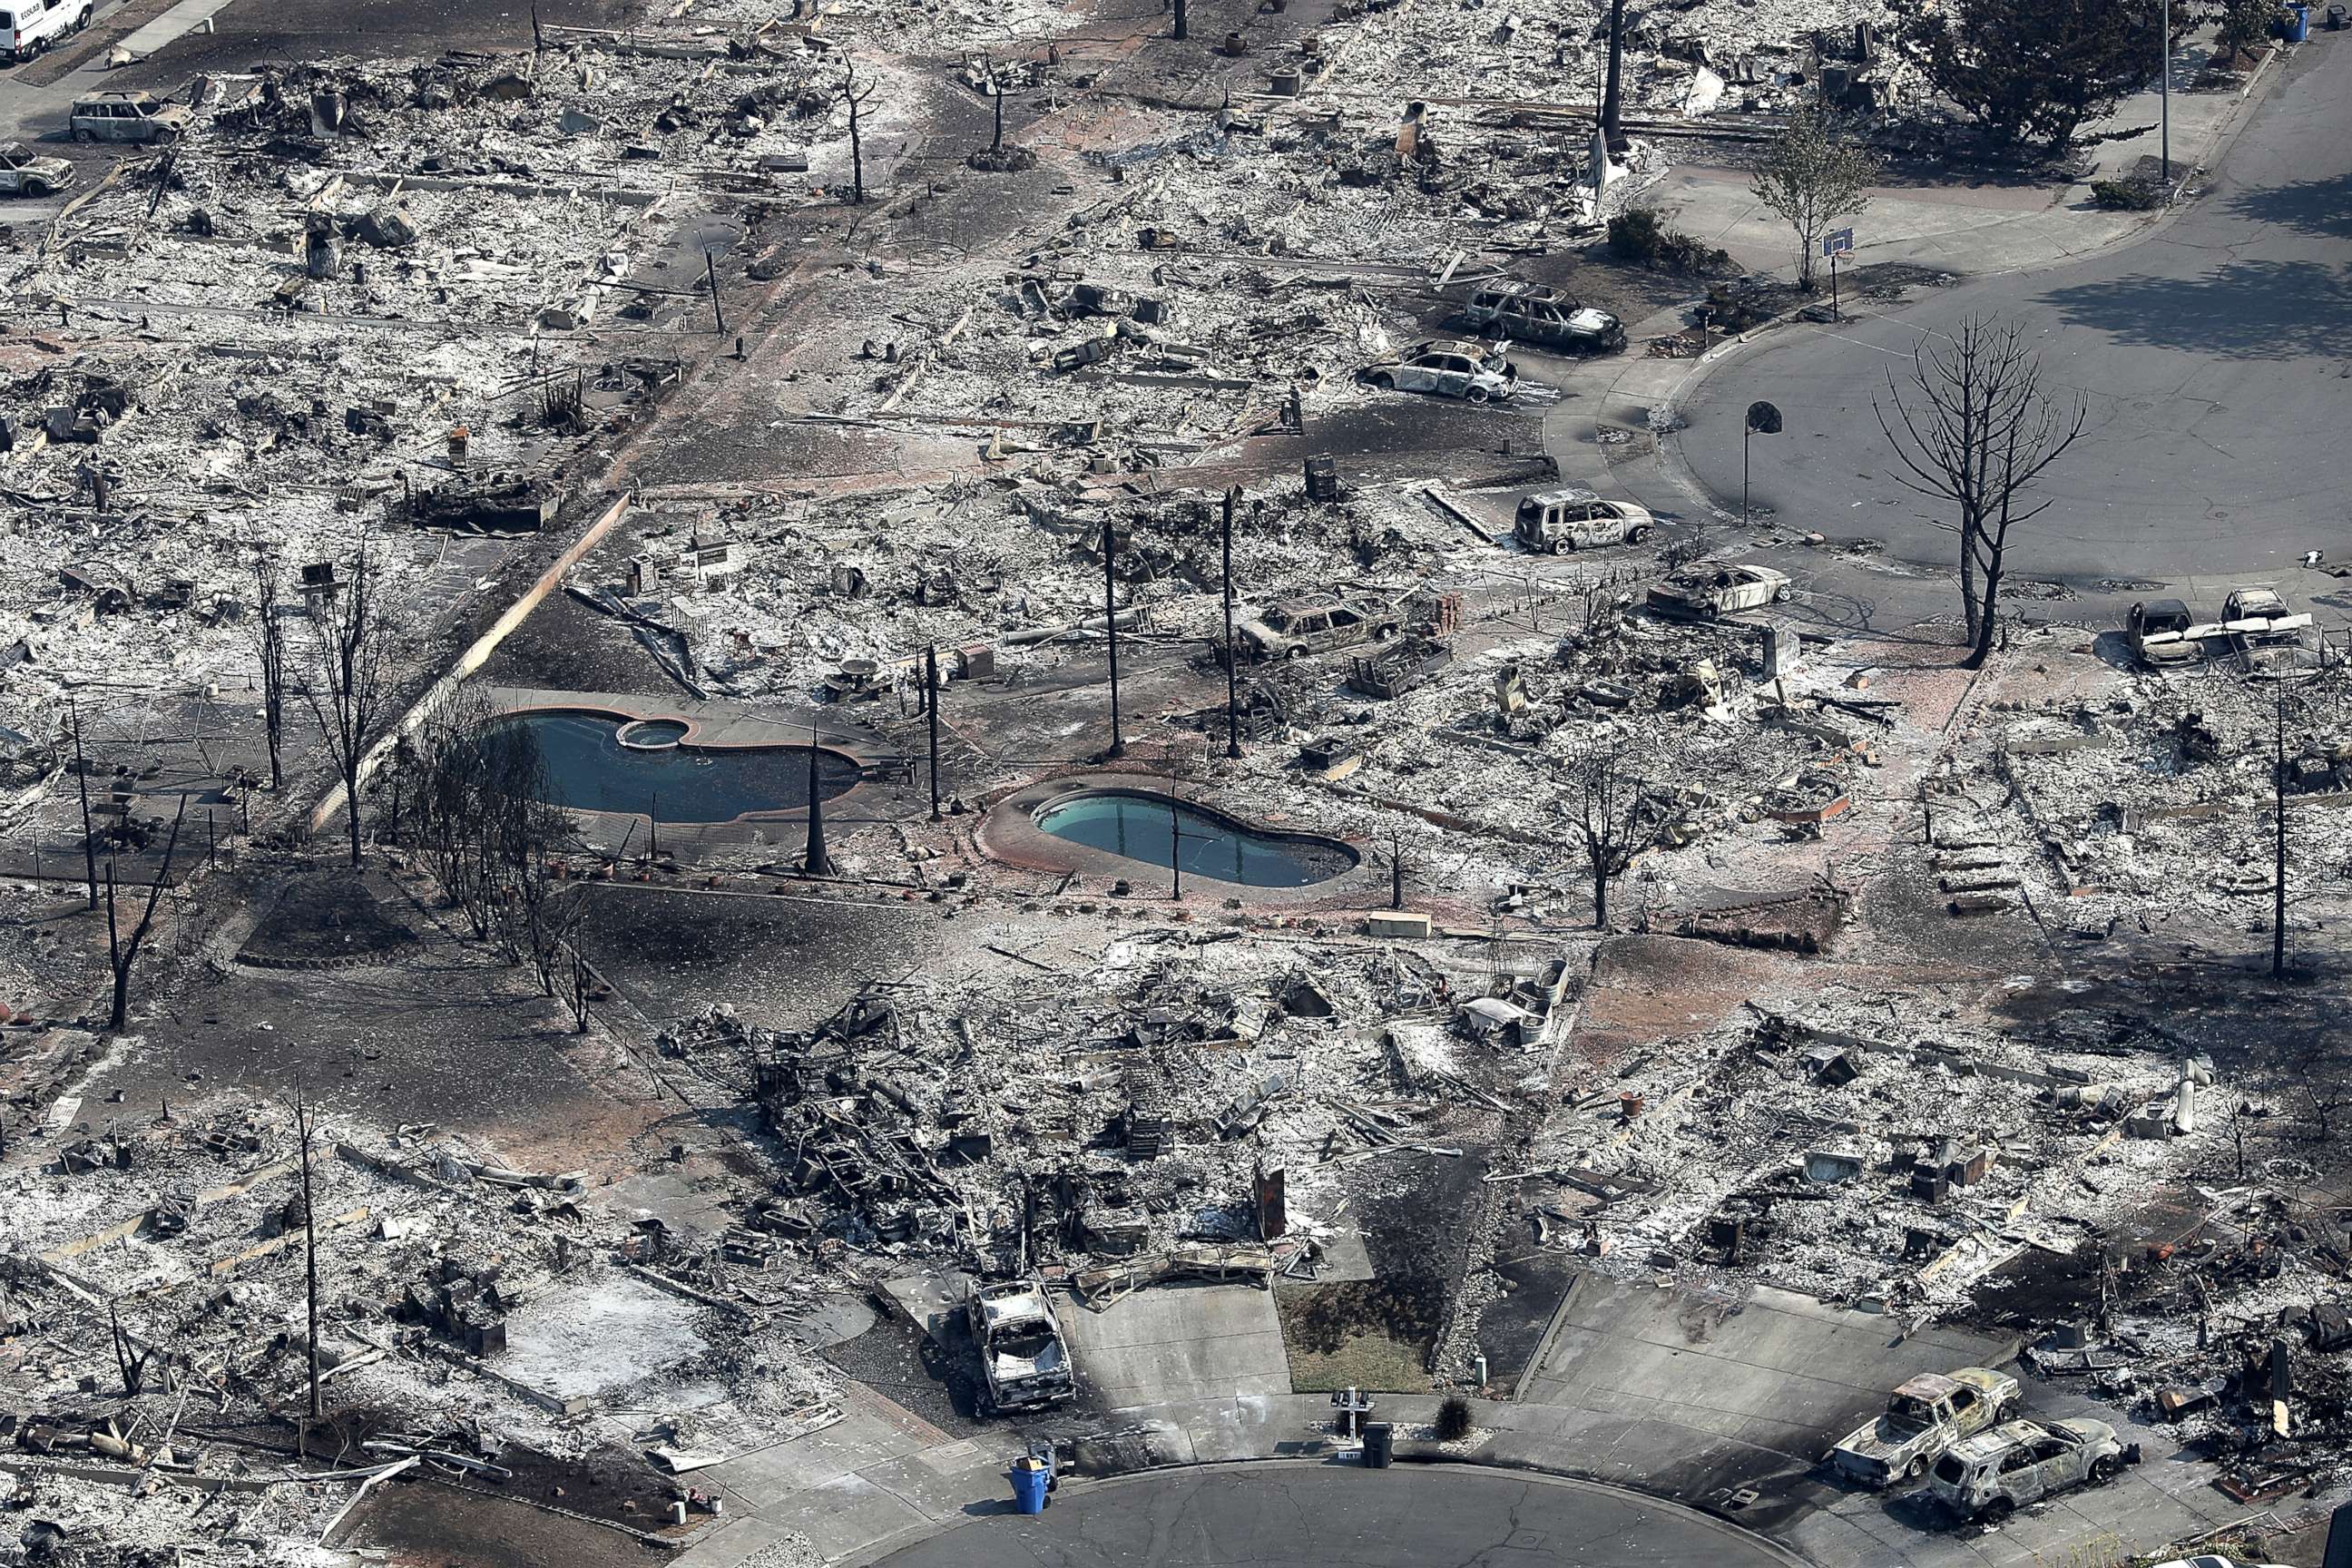 PHOTO: Thousands of homes and businesses that were destroyed by the Tubbs fire in Santa Rosa, Calif., Oct. 11, 2017.